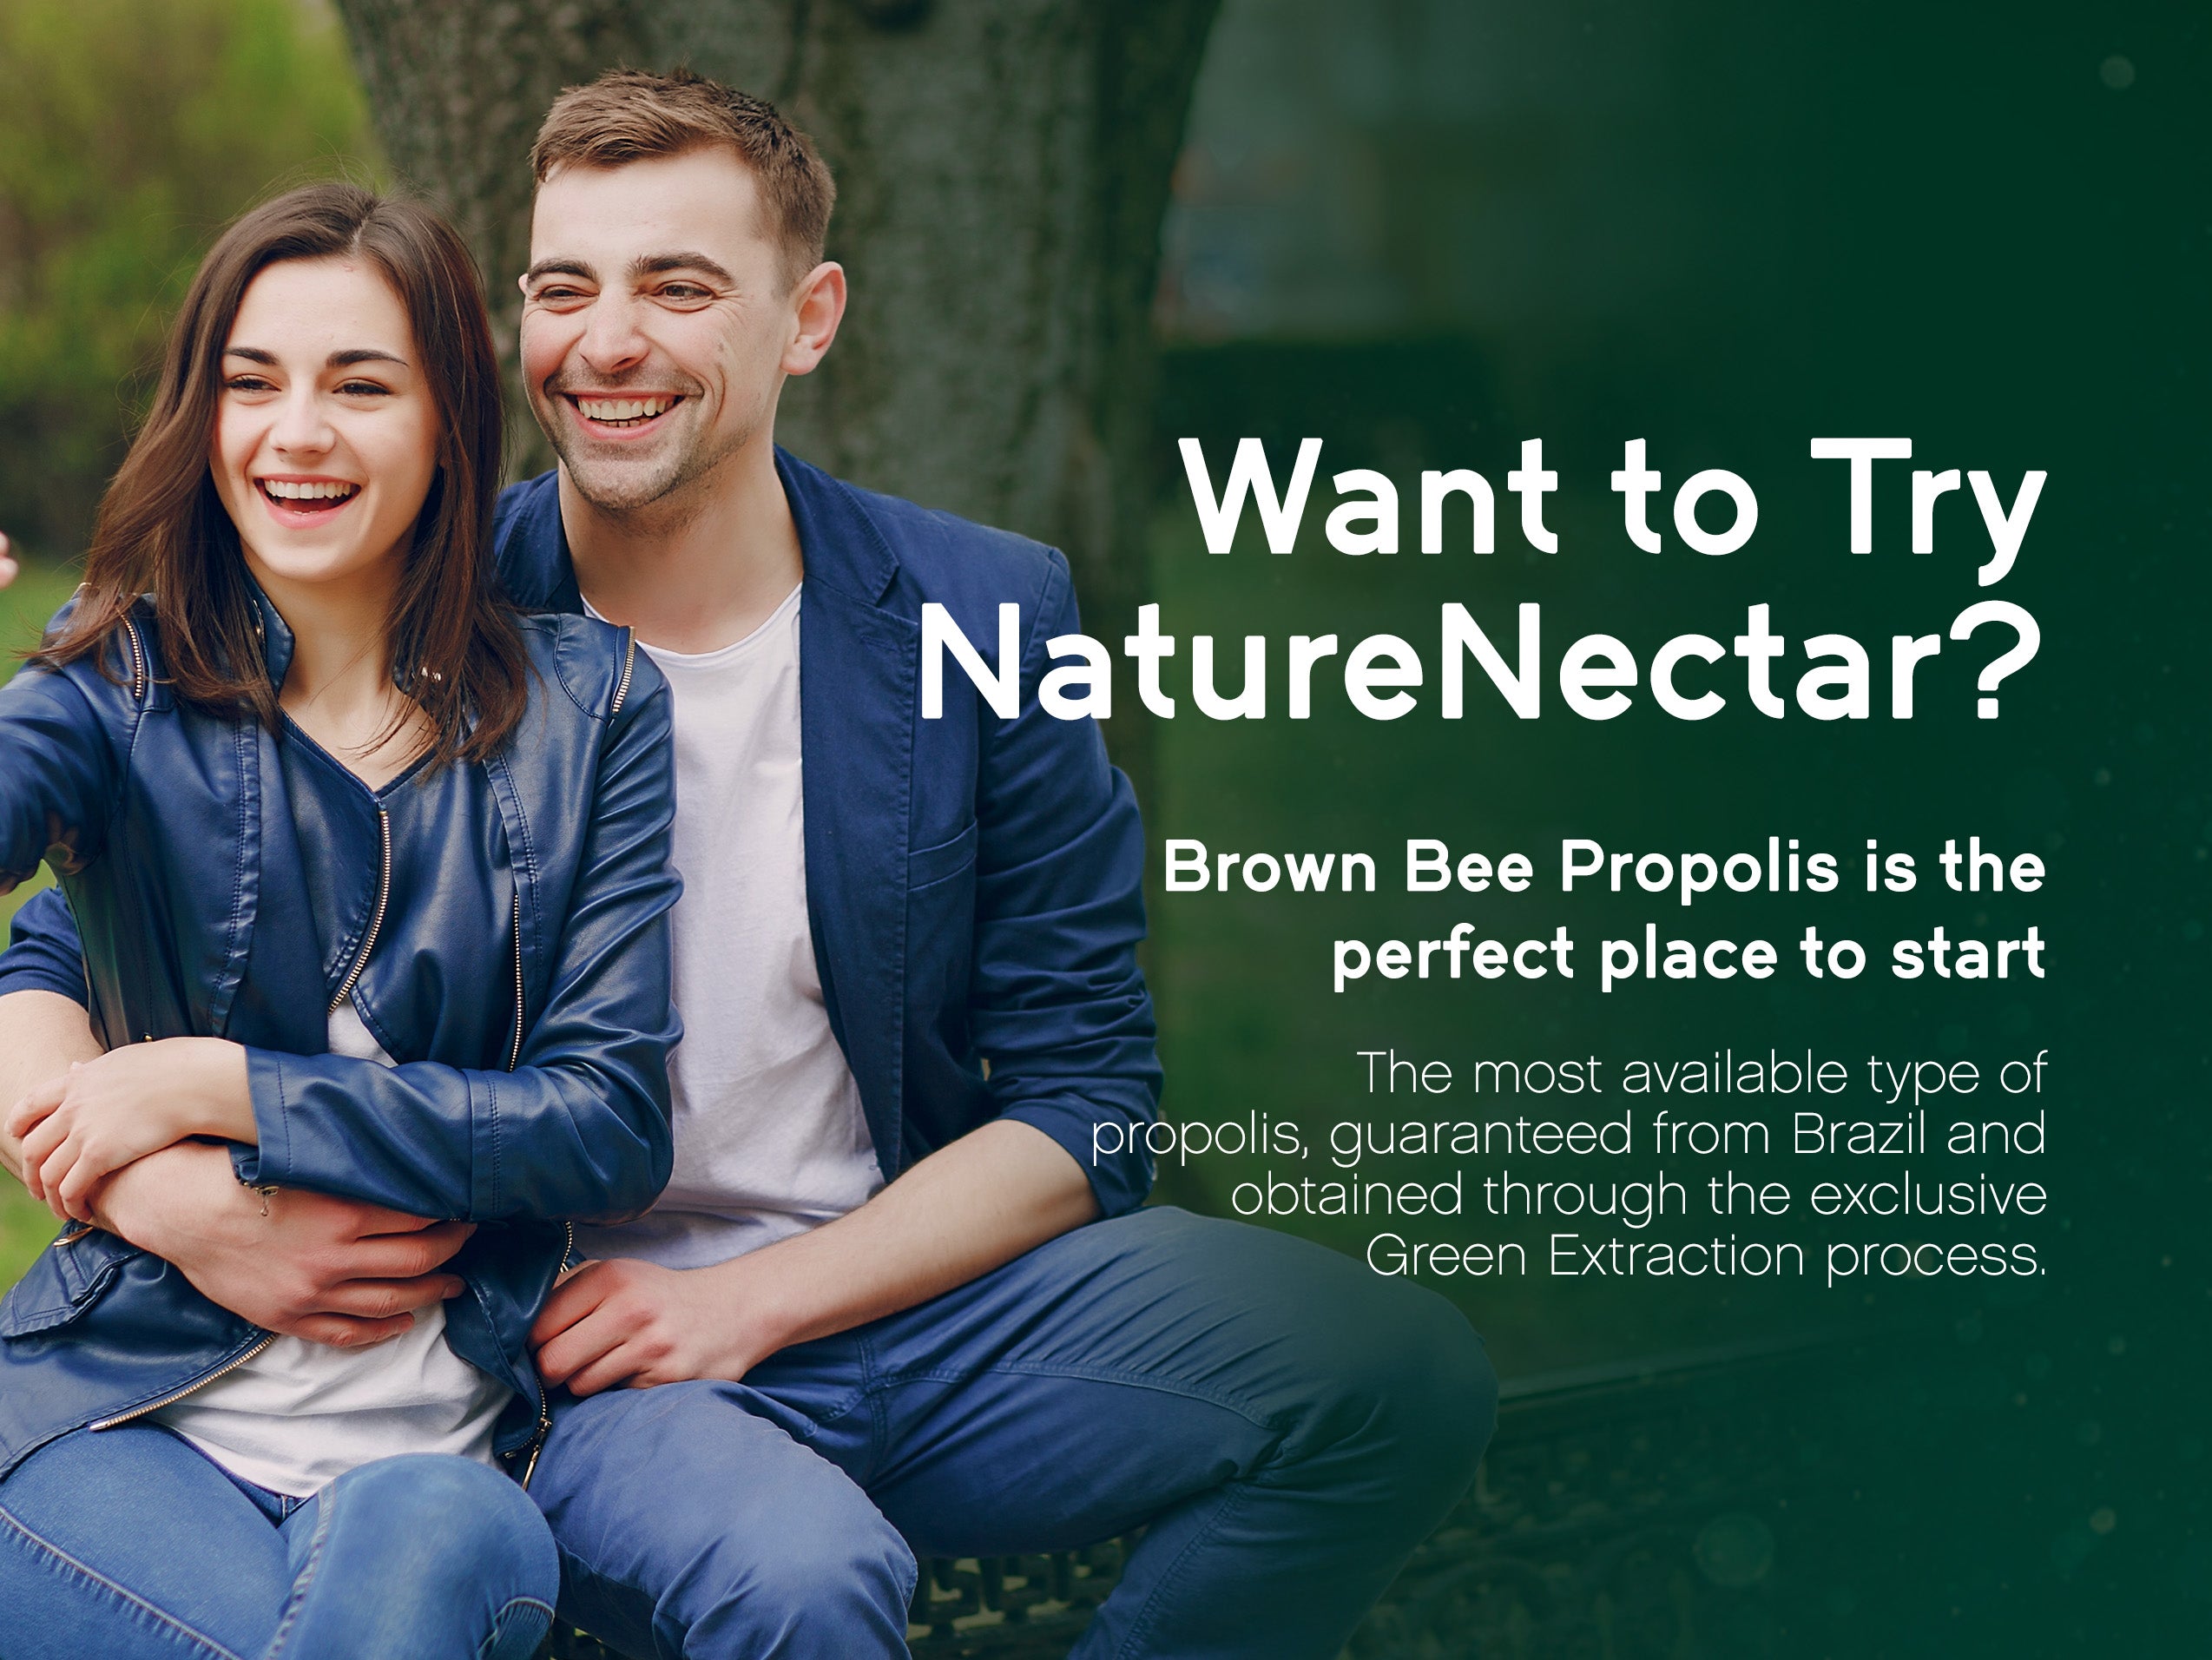 Brown Bee Propolis, 60 Veggie Capsules | NSF Contents Certified | Sourced from the Brazilian Southern Atlantic Forests